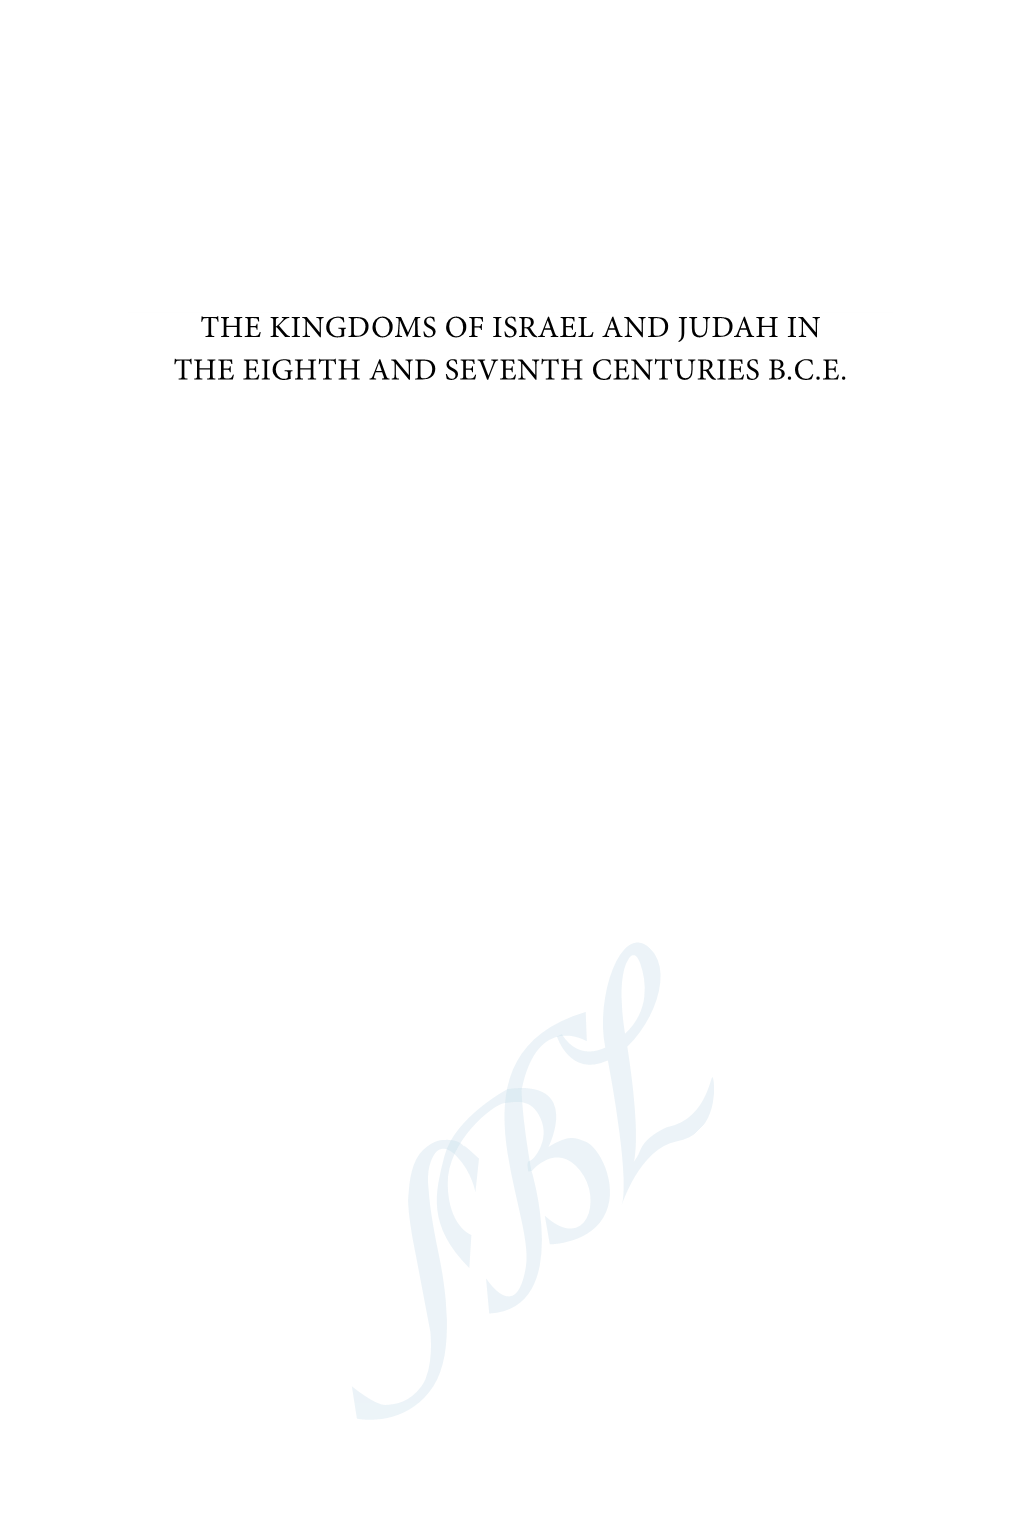 THE KINGDOMS of ISRAEL and JUDAH in the EIGHTH and SEVENTH CENTURIES B.C.E. Biblical Encyclopedia Leo G